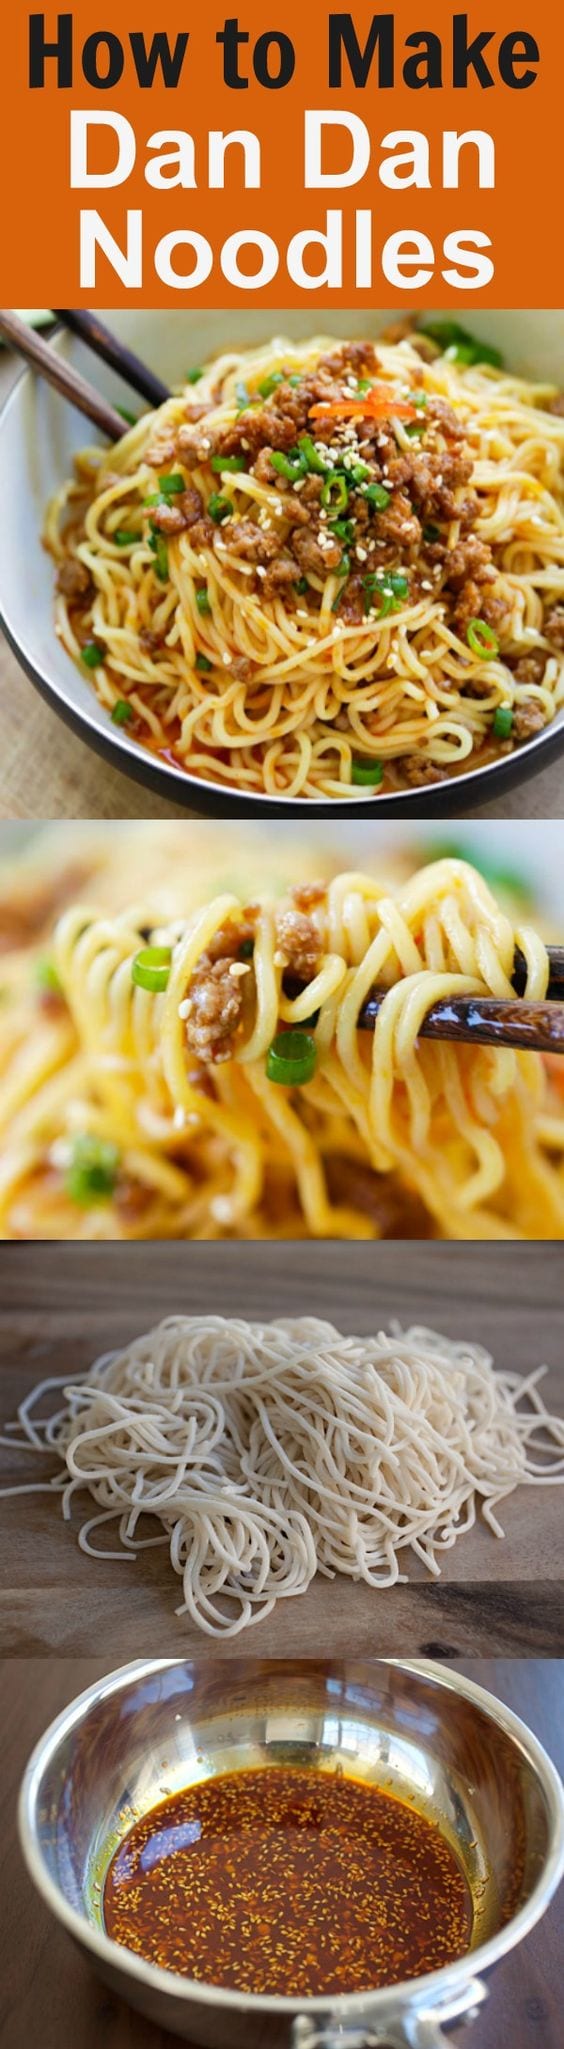 Dan Dan Noodles - Savory and spicy Sichuan noodles with ground meat. Dan Dan Mian is a delicious and hearty meal. Learn it with this easy recipe. | rasamalaysia.com